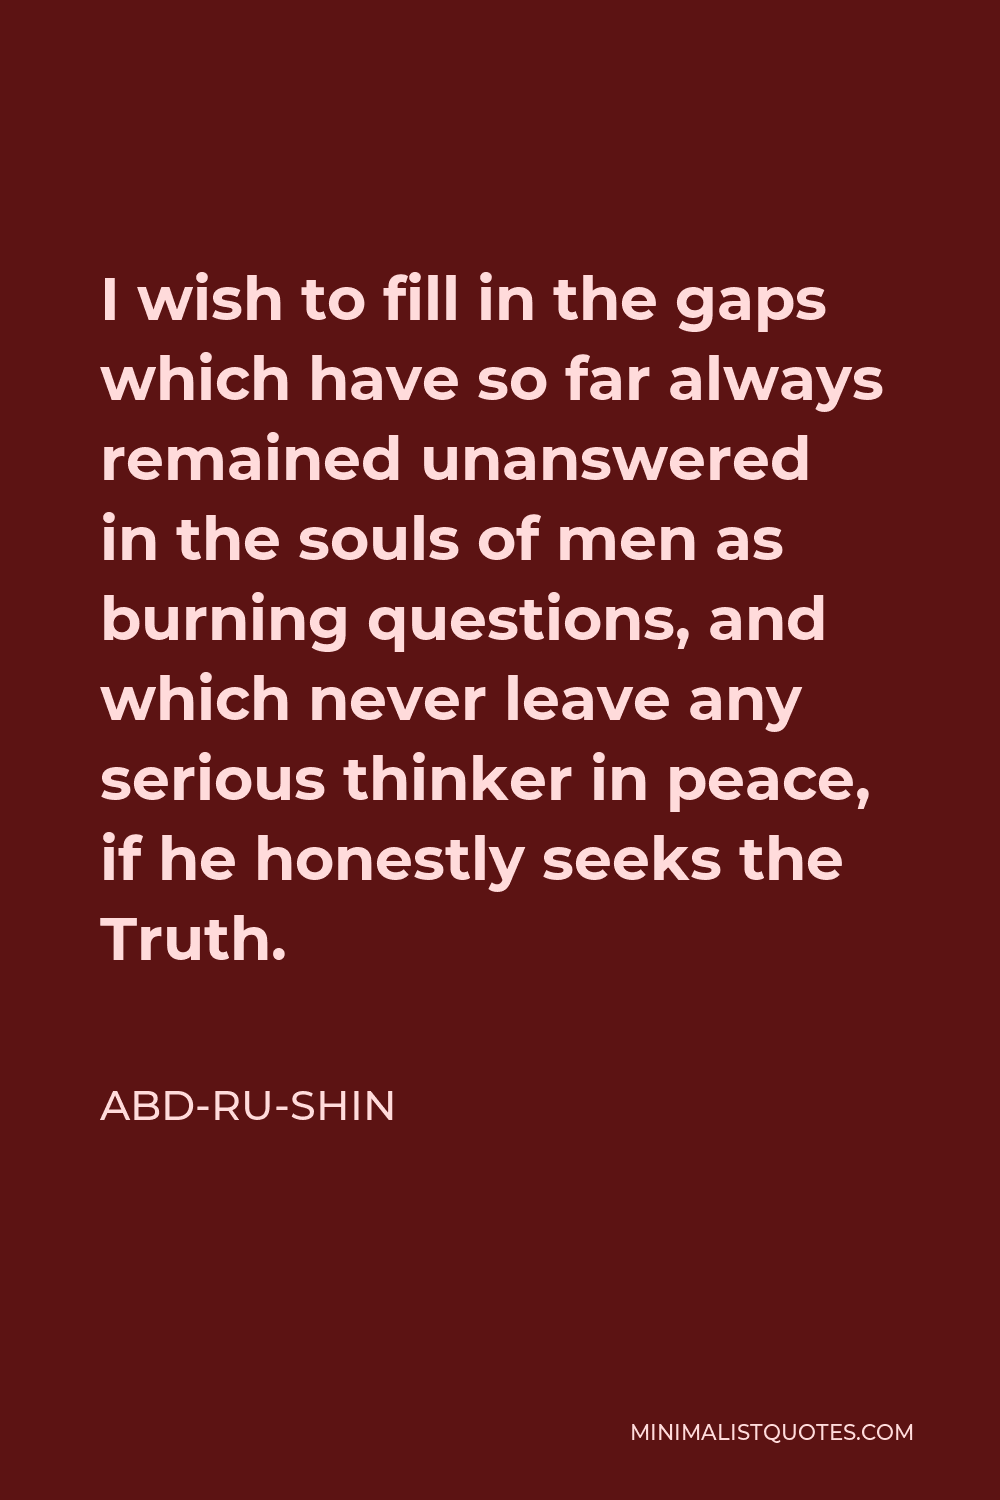 Abd-ru-shin Quote - I wish to fill in the gaps which have so far always remained unanswered in the souls of men as burning questions, and which never leave any serious thinker in peace, if he honestly seeks the Truth.